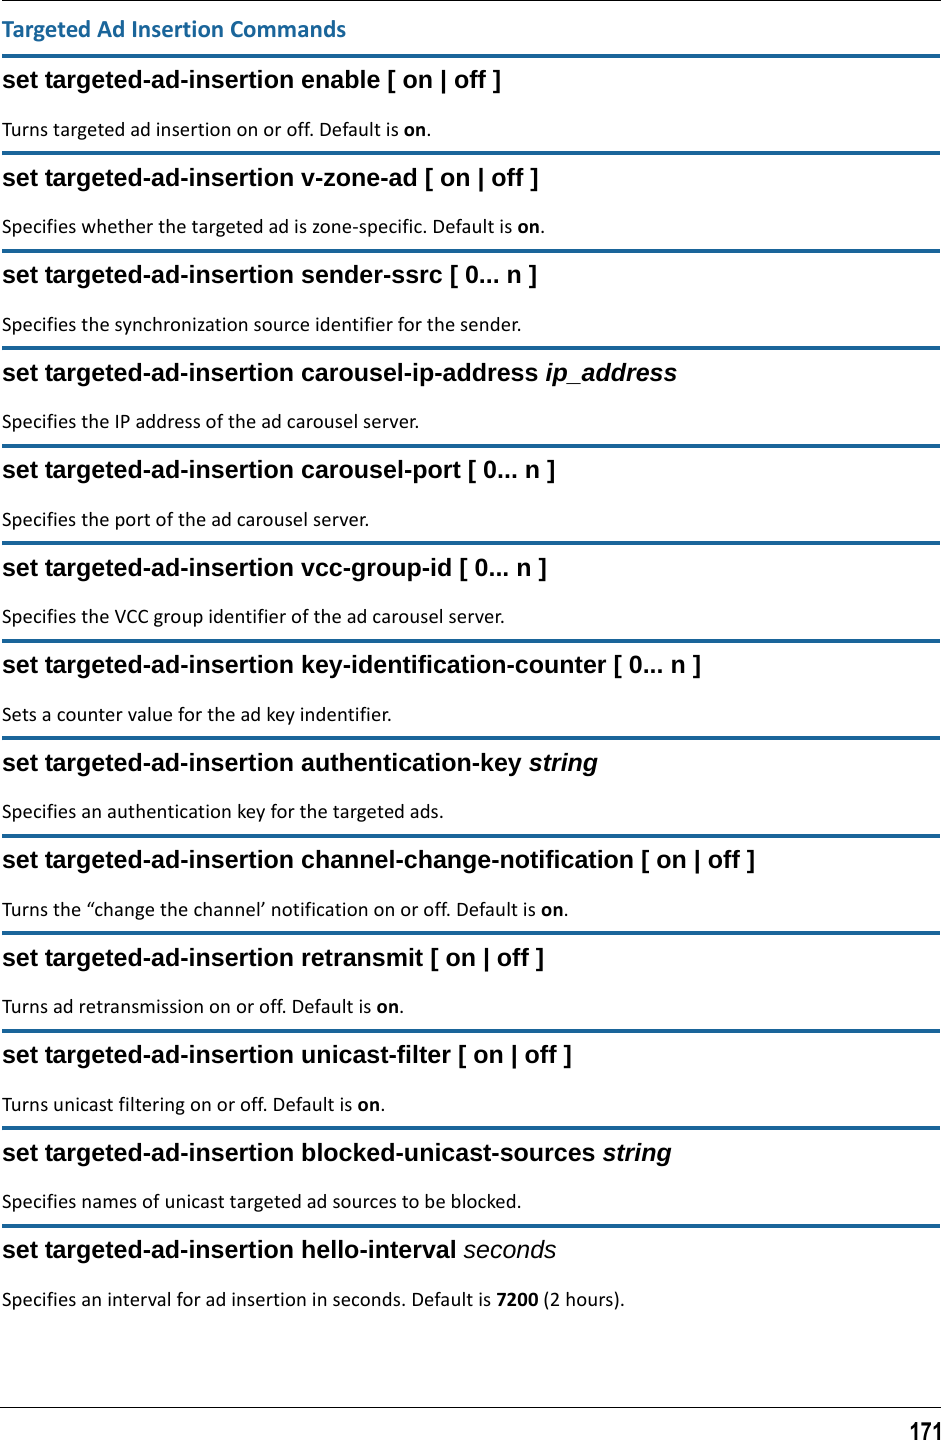 171Targeted Ad Insertion Commandsset targeted-ad-insertion enable [ on | off ]Turns targeted ad insertion on or off. Default is on.set targeted-ad-insertion v-zone-ad [ on | off ]Specifies whether the targeted ad is zone-specific. Default is on.set targeted-ad-insertion sender-ssrc [ 0... n ]Specifies the synchronization source identifier for the sender.set targeted-ad-insertion carousel-ip-address ip_addressSpecifies the IP address of the ad carousel server.set targeted-ad-insertion carousel-port [ 0... n ]Specifies the port of the ad carousel server.set targeted-ad-insertion vcc-group-id [ 0... n ]Specifies the VCC group identifier of the ad carousel server.set targeted-ad-insertion key-identification-counter [ 0... n ]Sets a counter value for the ad key indentifier.set targeted-ad-insertion authentication-key stringSpecifies an authentication key for the targeted ads.set targeted-ad-insertion channel-change-notification [ on | off ]Turns the “change the channel’ notification on or off. Default is on.set targeted-ad-insertion retransmit [ on | off ]Turns ad retransmission on or off. Default is on.set targeted-ad-insertion unicast-filter [ on | off ]Turns unicast filtering on or off. Default is on.set targeted-ad-insertion blocked-unicast-sources stringSpecifies names of unicast targeted ad sources to be blocked.set targeted-ad-insertion hello-interval secondsSpecifies an interval for ad insertion in seconds. Default is 7200 (2 hours).